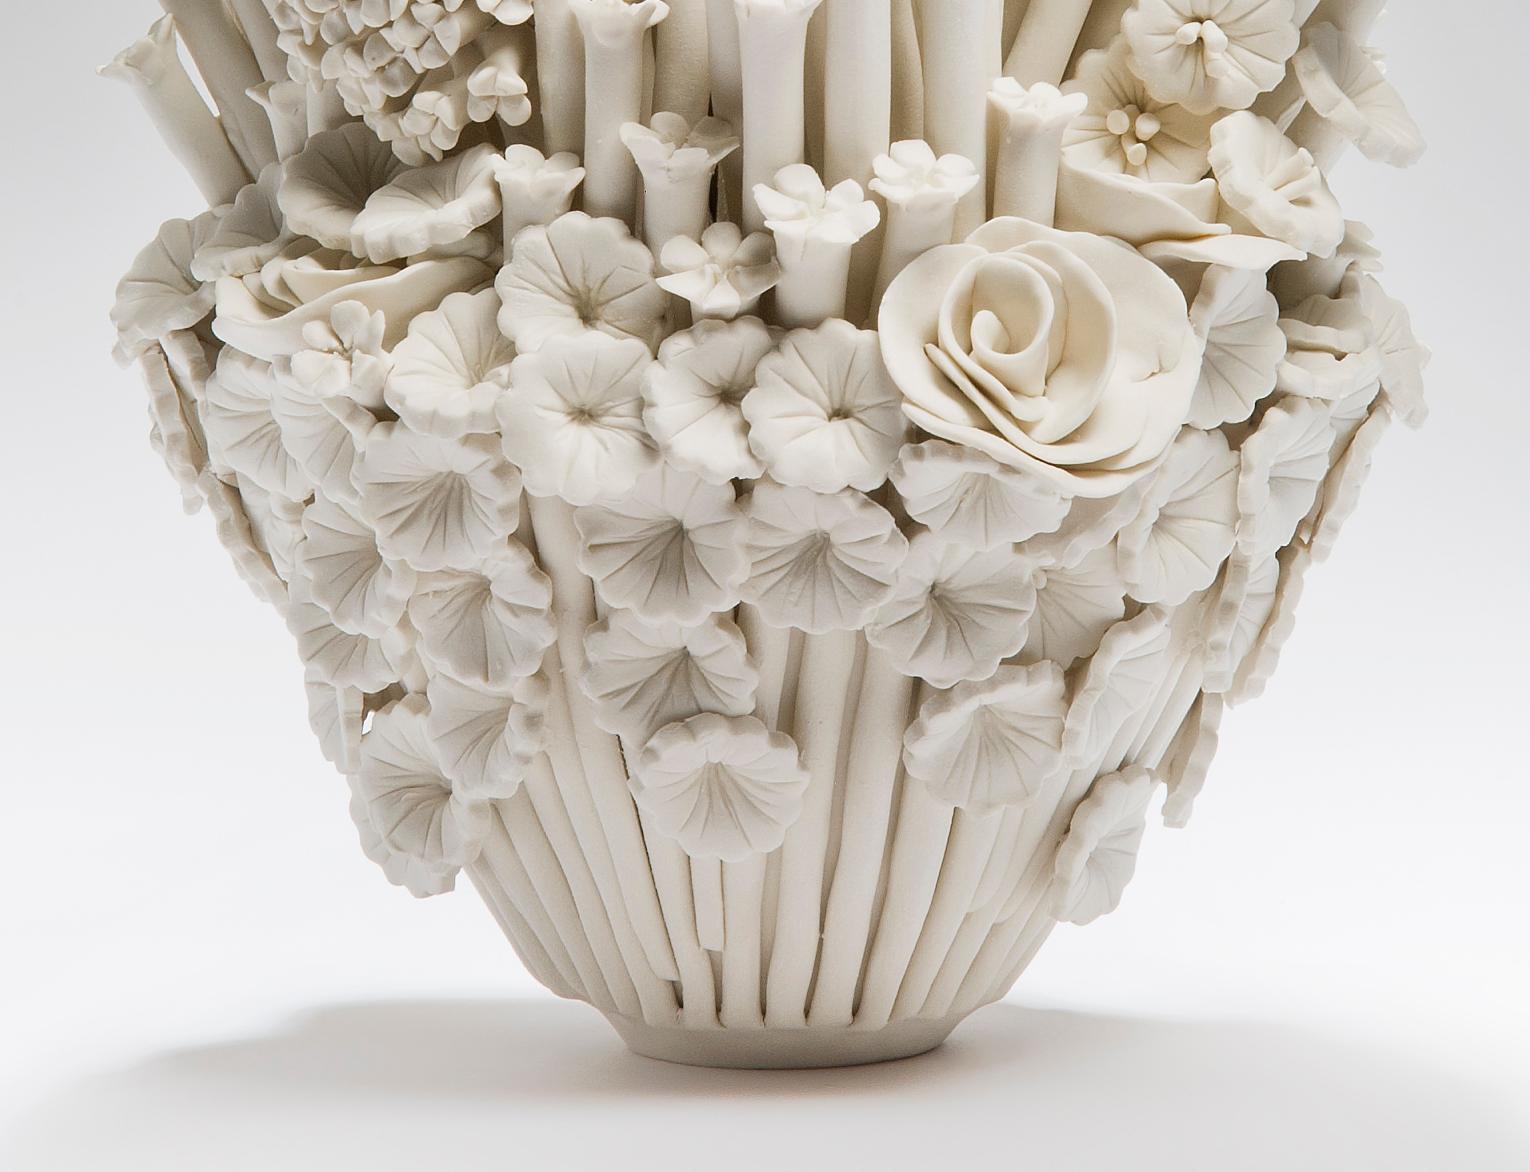 Hand-Crafted Efflorescence III, a Unique Porcelain Floral Sculpture by Vanessa Hogge